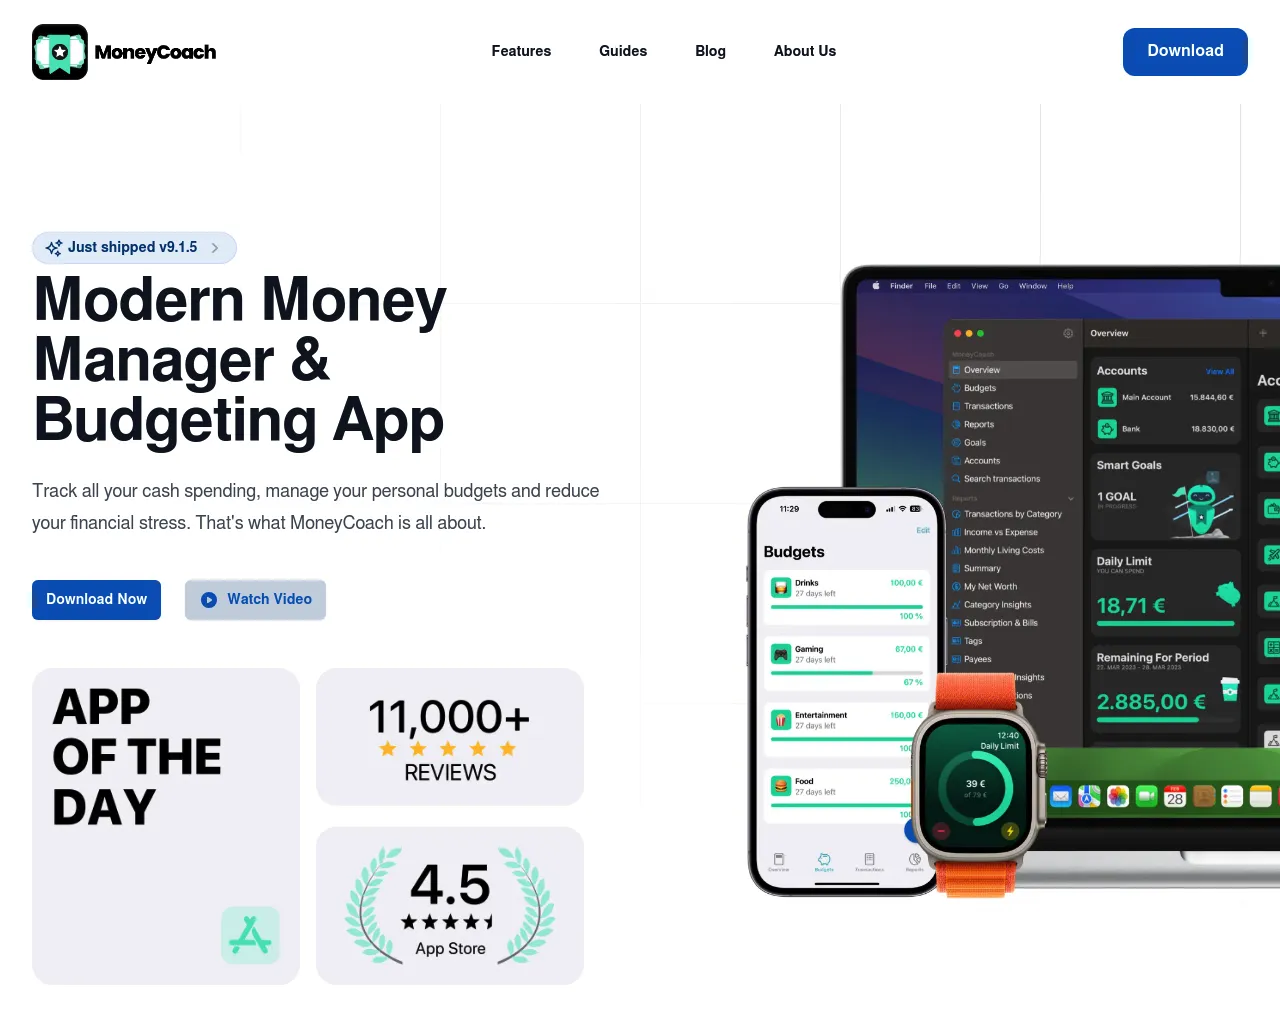 MoneyCoach - Modern Money Manager And Budgeting App